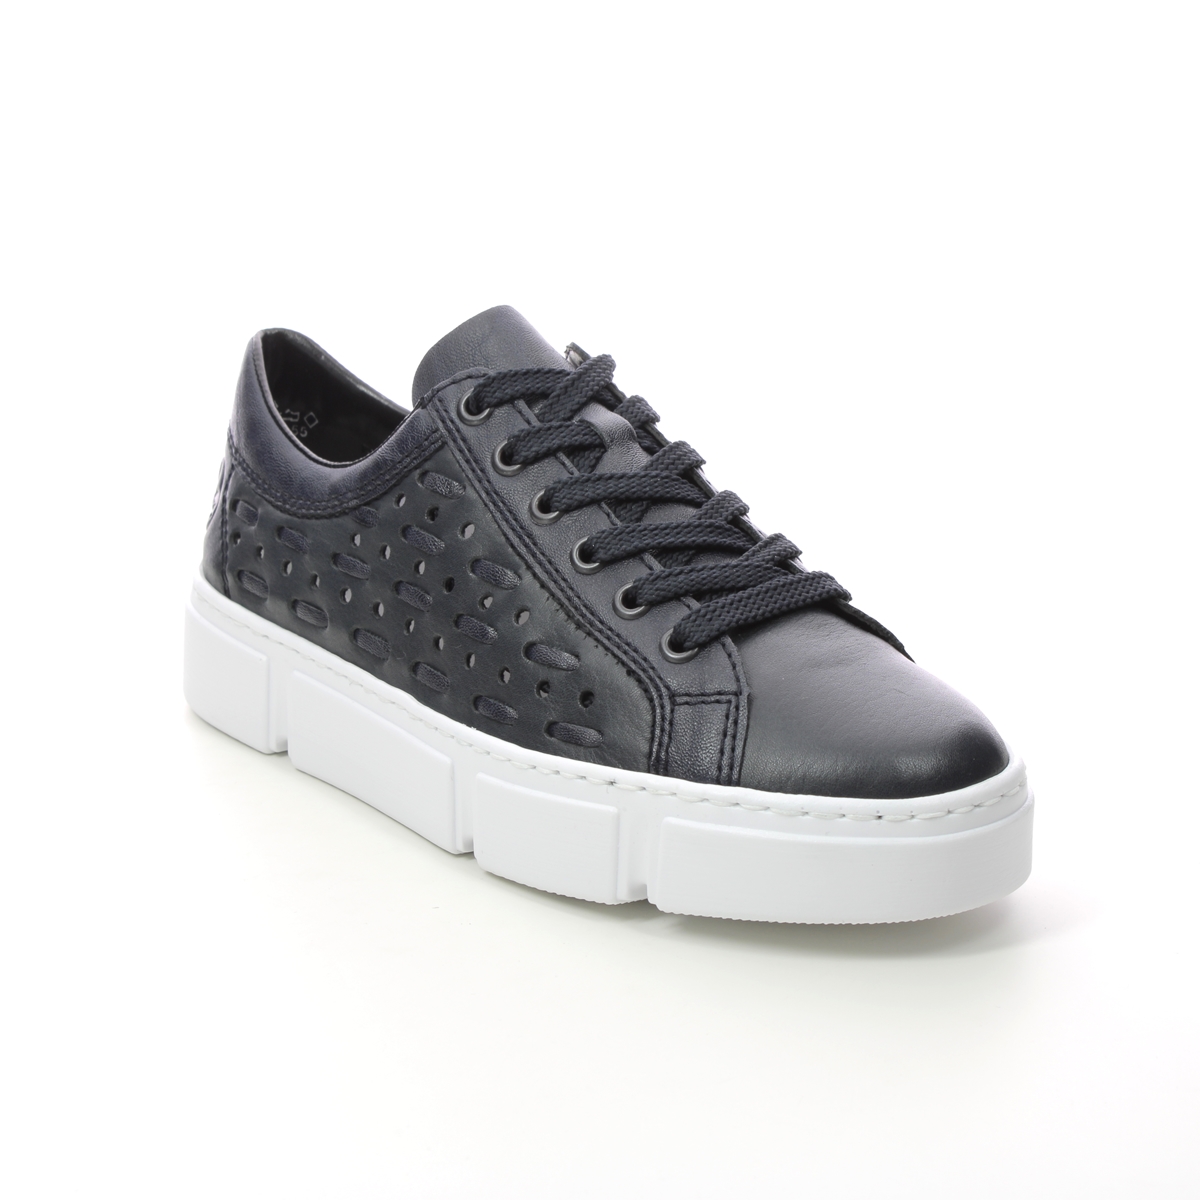 Rieker Hagen Navy Leather Womens Trainers N5918-14 In Size 41 In Plain Navy Leather